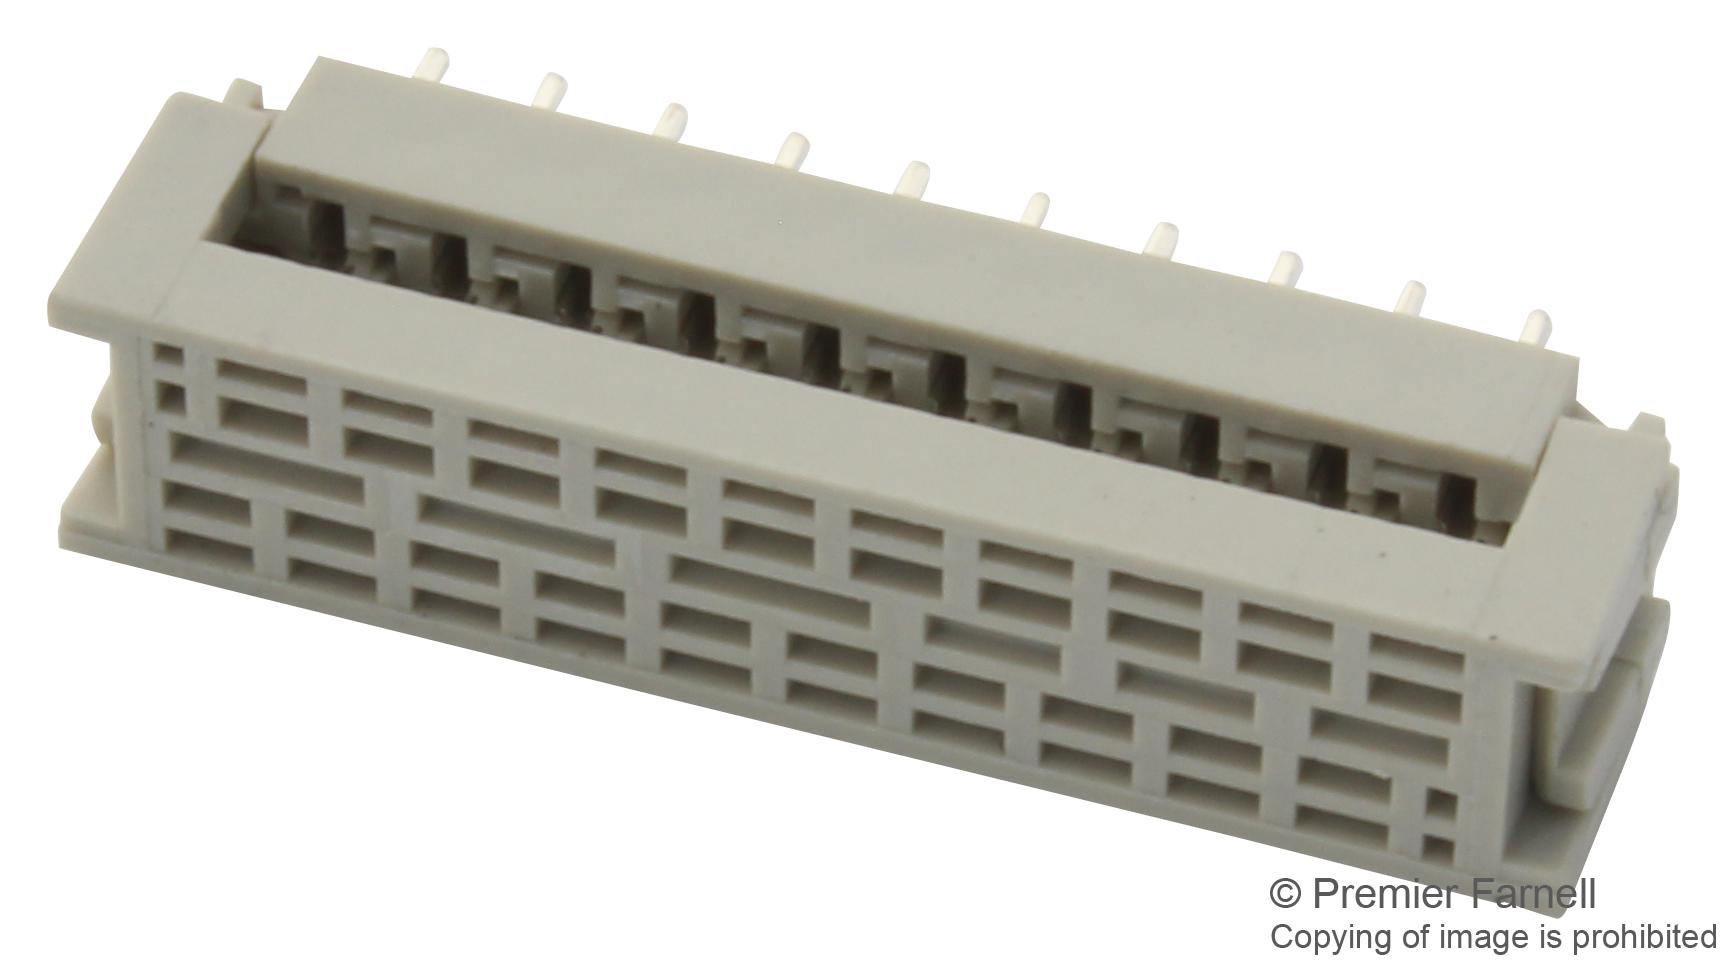 2-216093-0 CONNECTOR, IDC, TRANSITION, 2ROW, 20WAY AMP - TE CONNECTIVITY